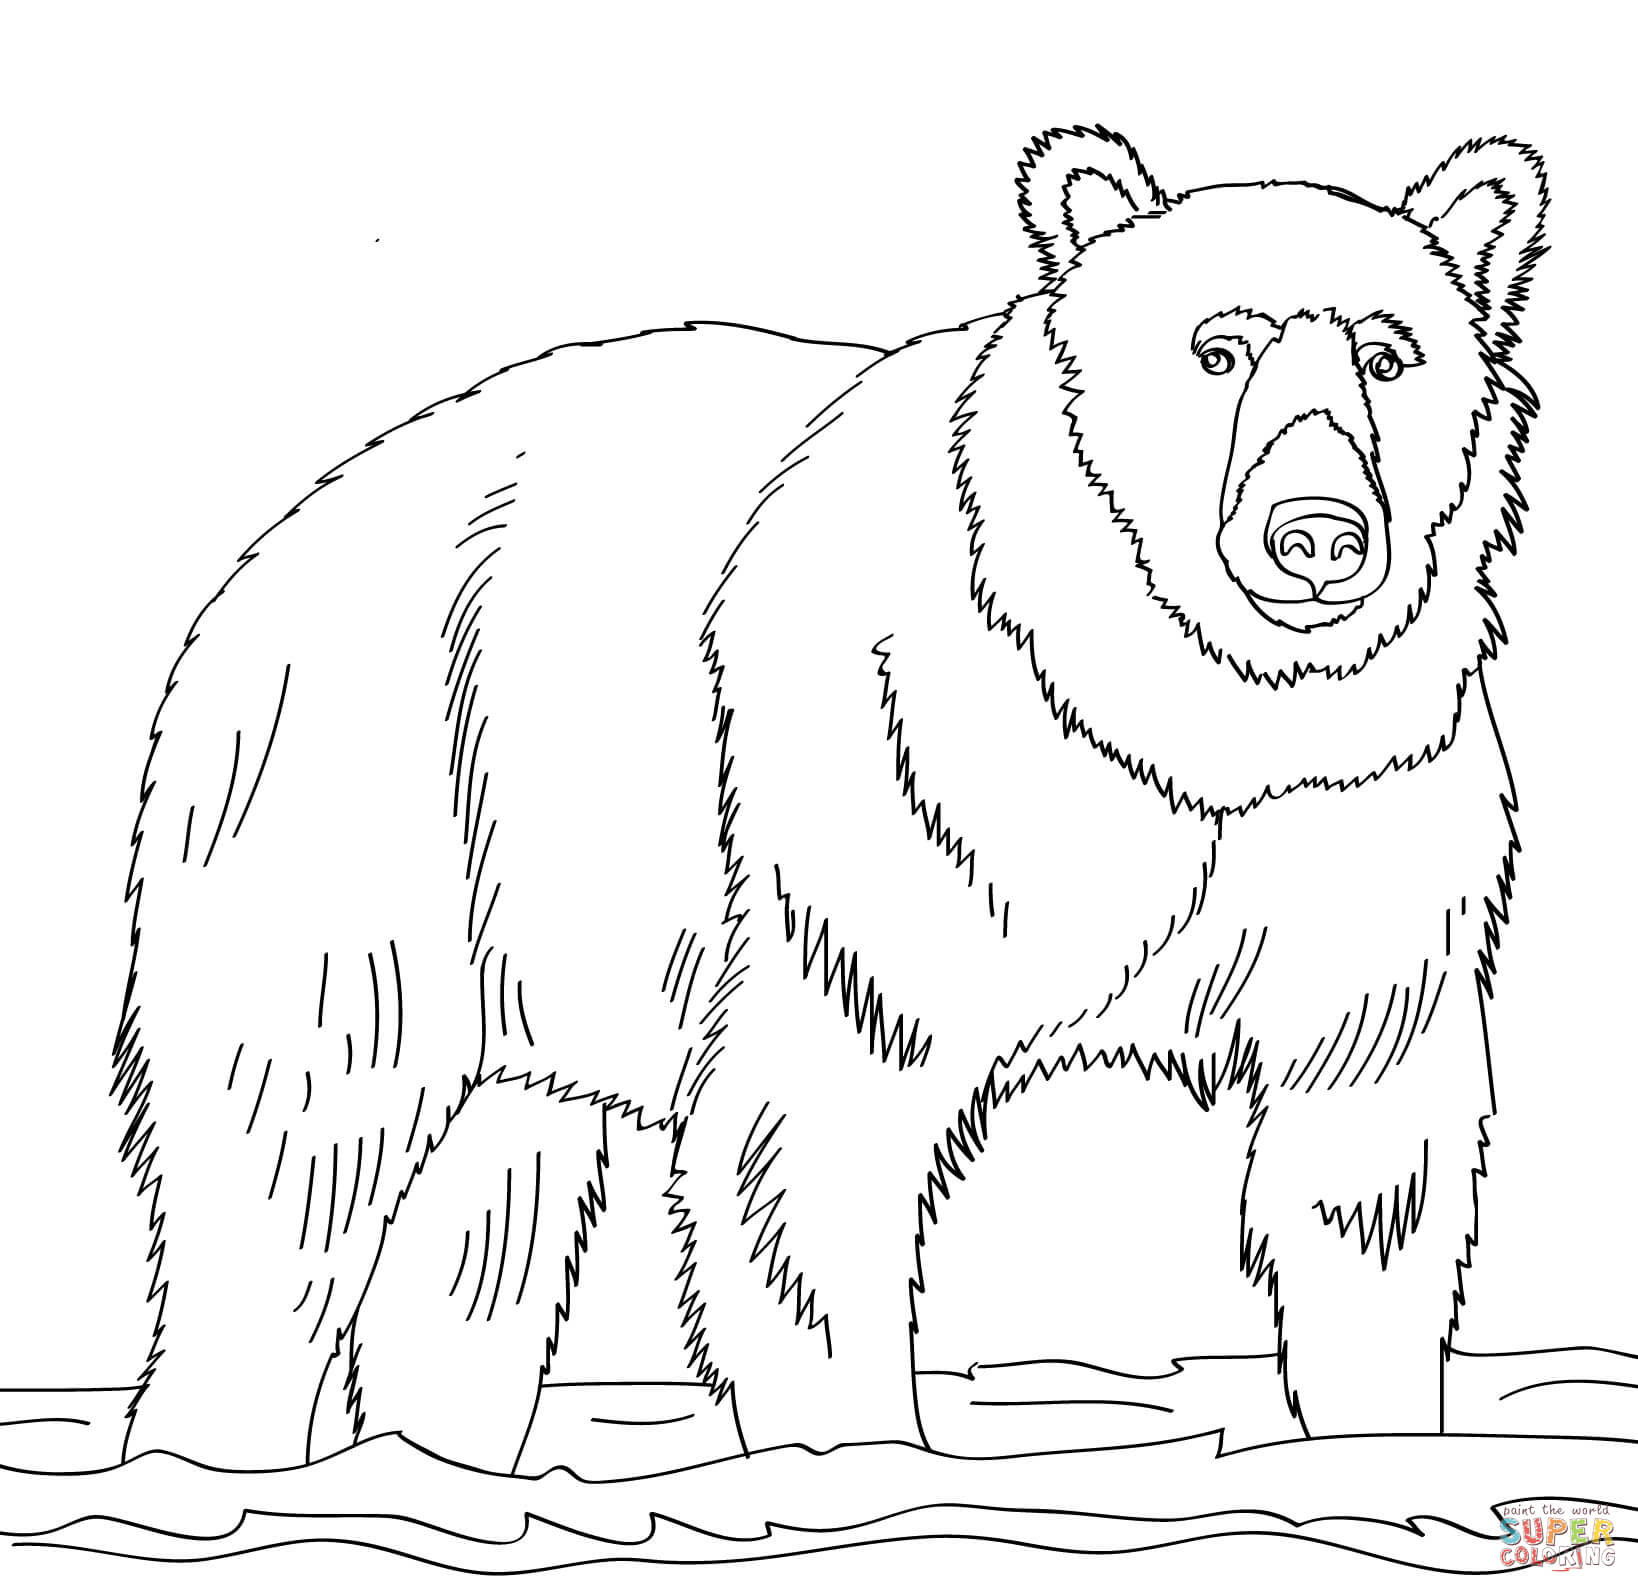 Brown bears coloring pages | Free Coloring Pages